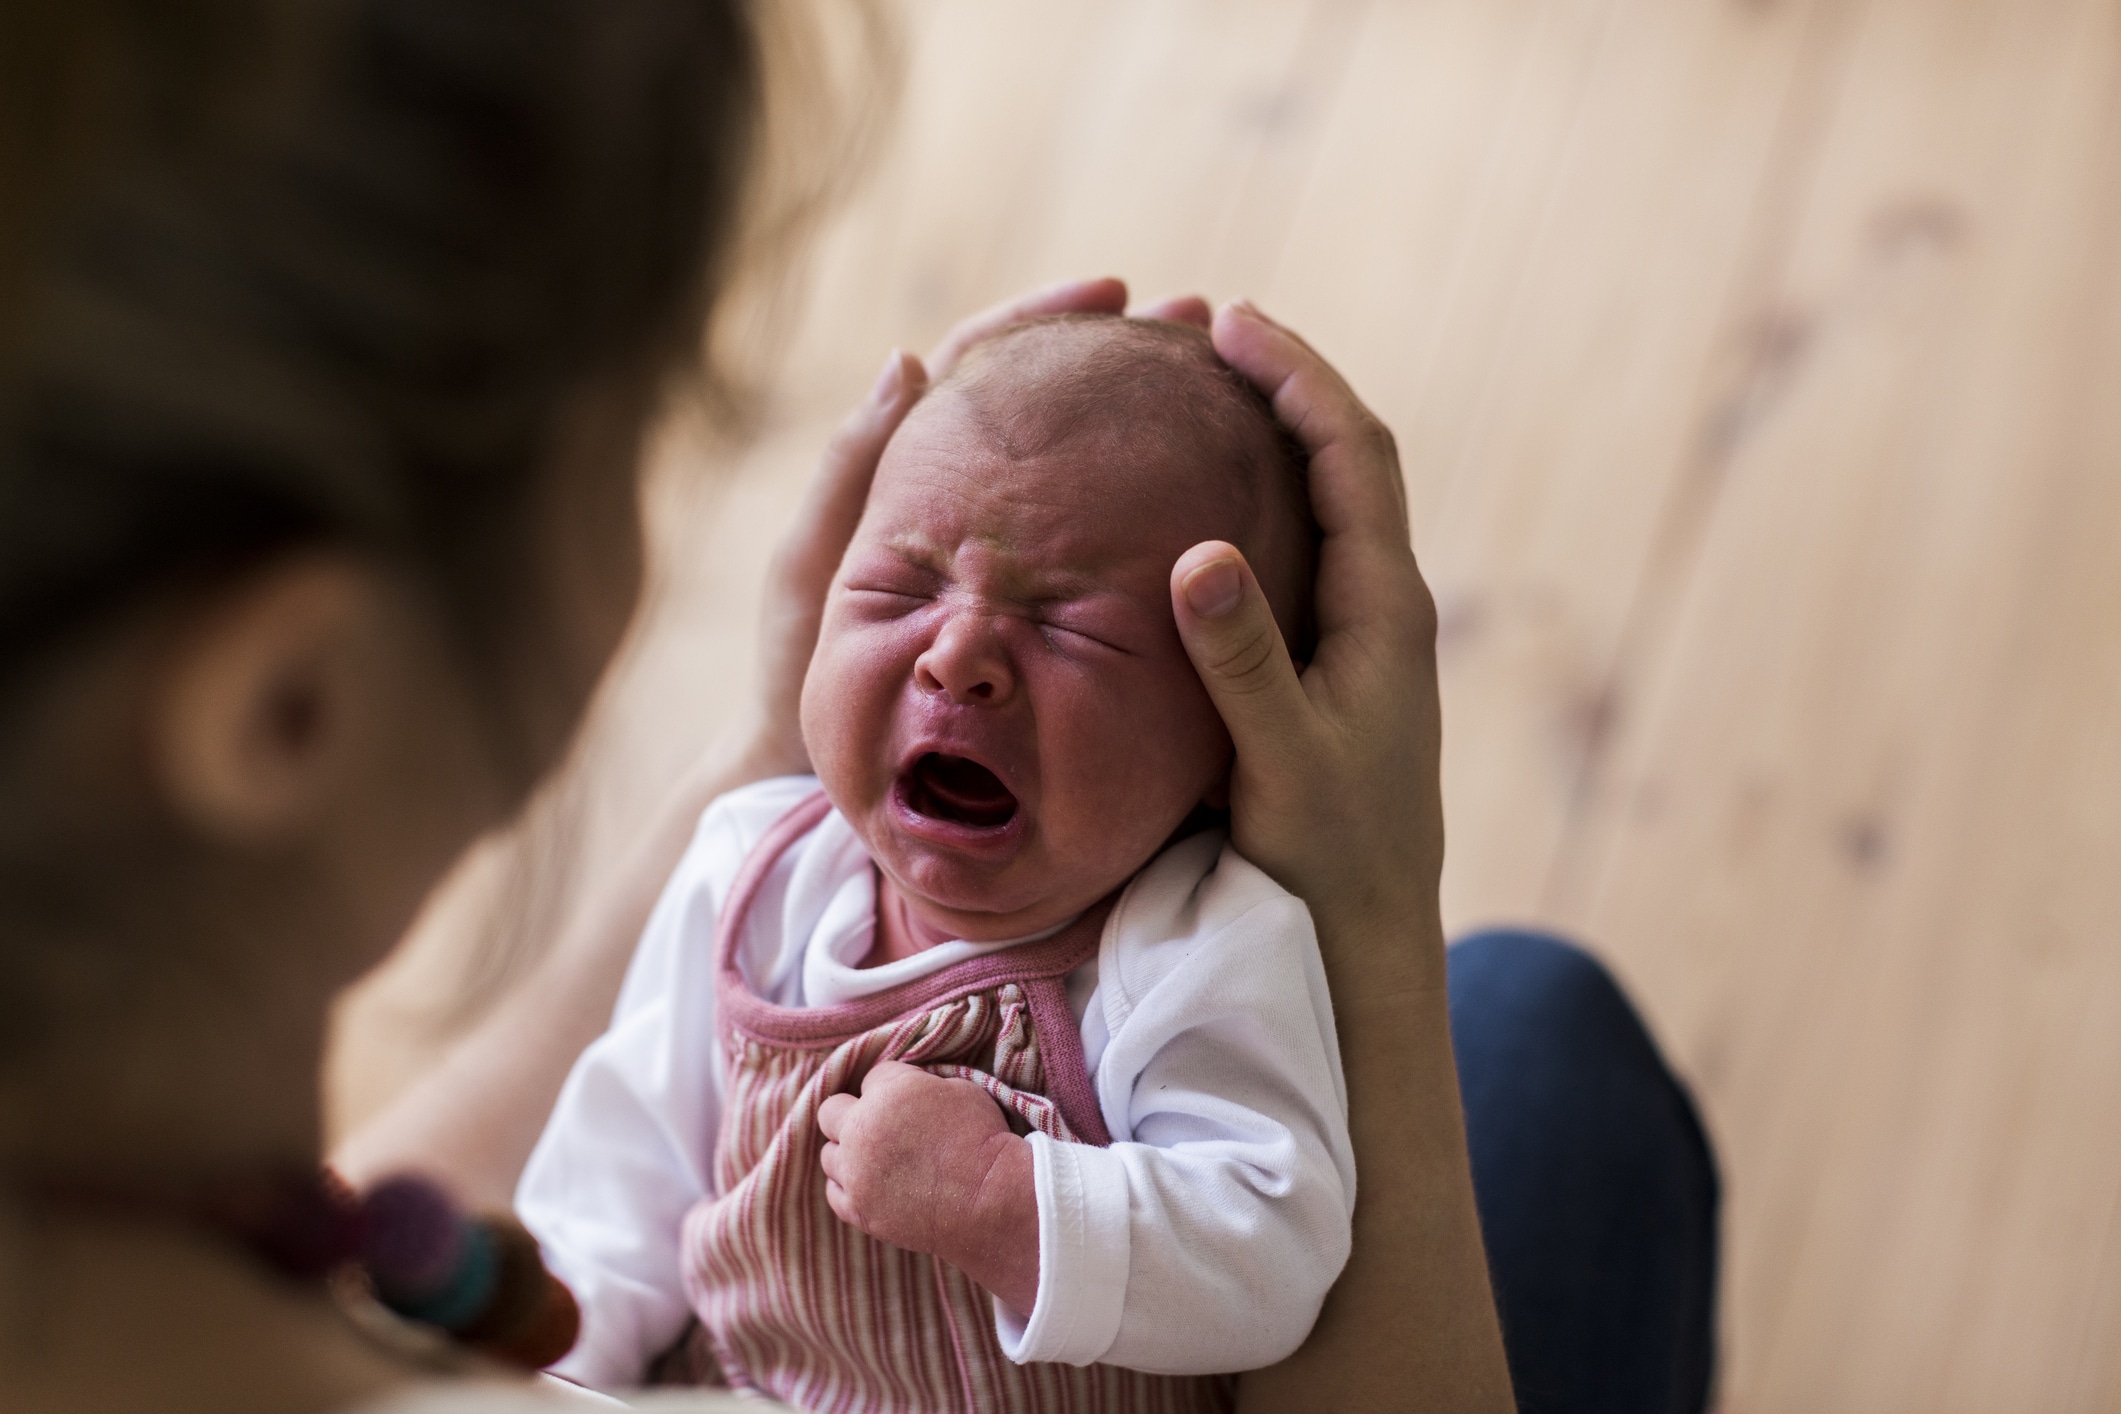 Image of a crying newborn